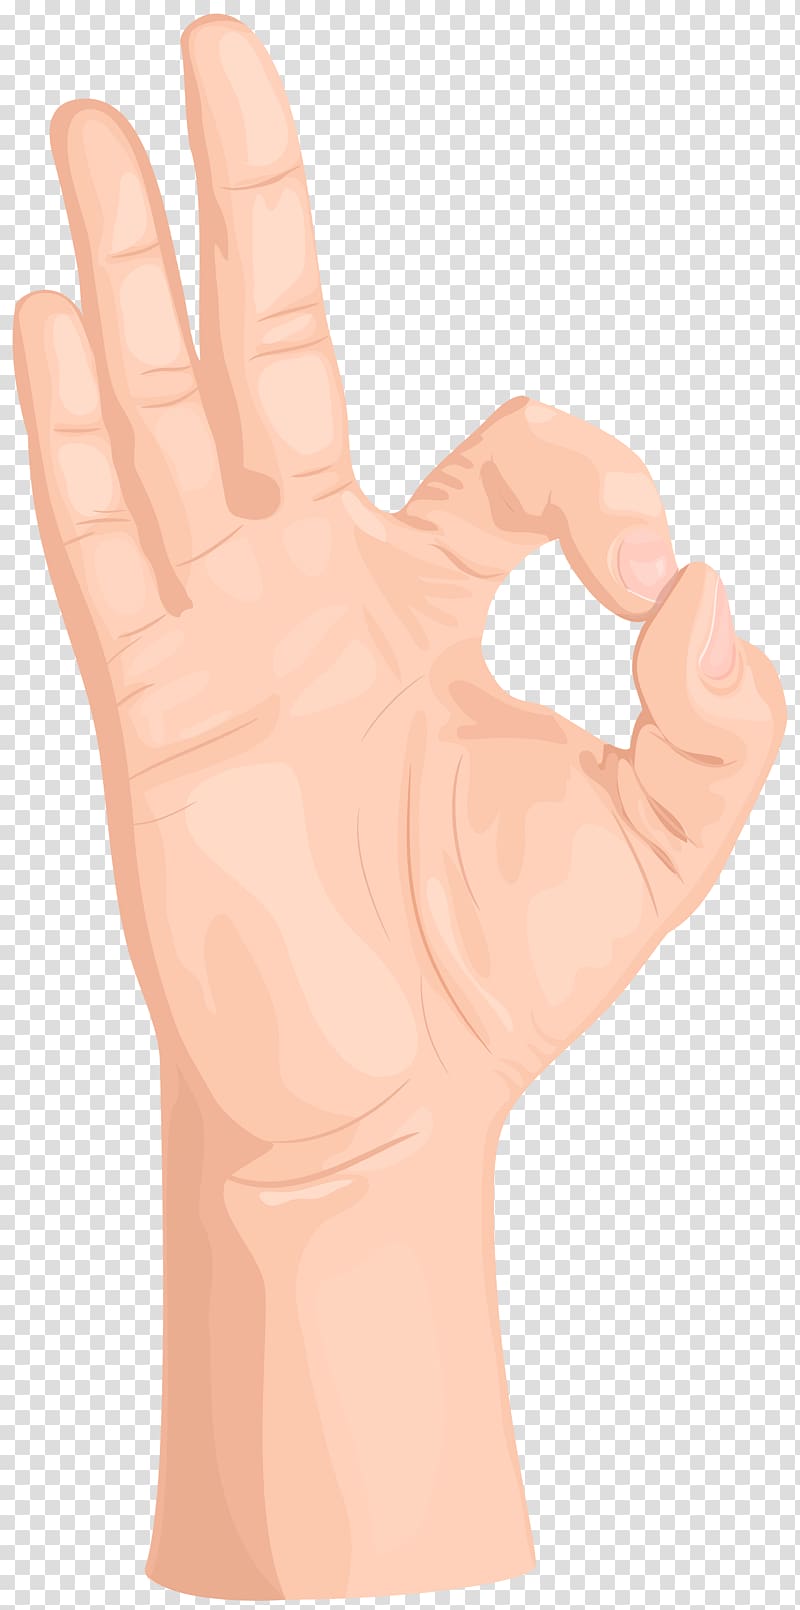 person's right hand illustration, Gesture Thumb, OK Hand Gesture transparent background PNG clipart